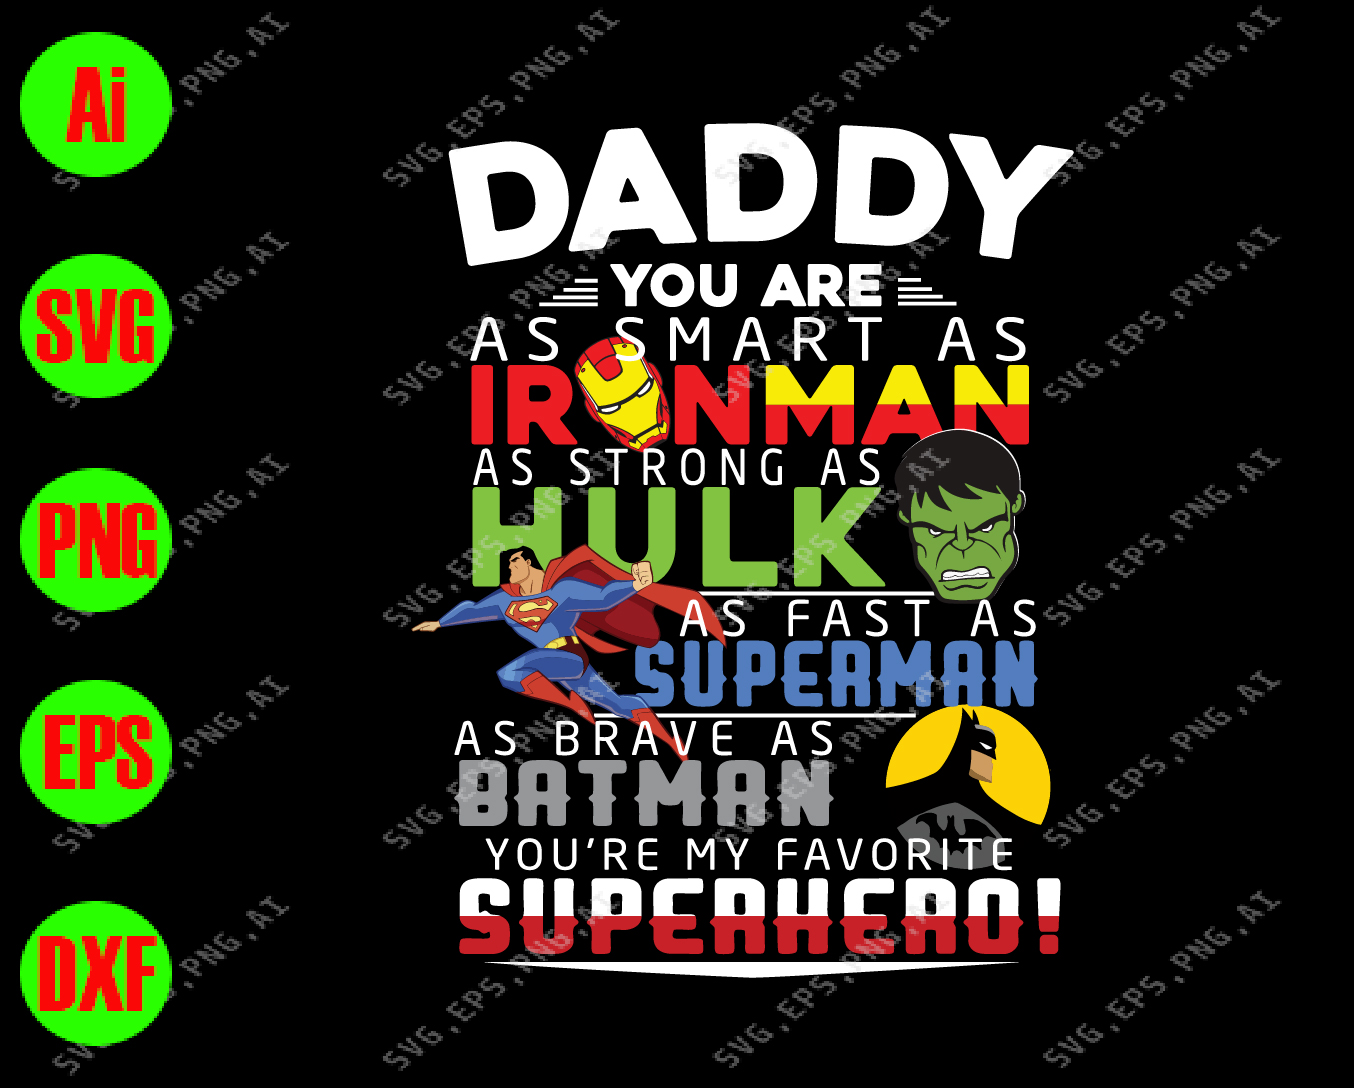 Download Daddy You Are Smart As Iron Man As Strong As Hulk As Fast As Superman As Brave As Batman You Re My Favorite Superhero Svg Dxf Eps Png Digital Download Designbtf Com